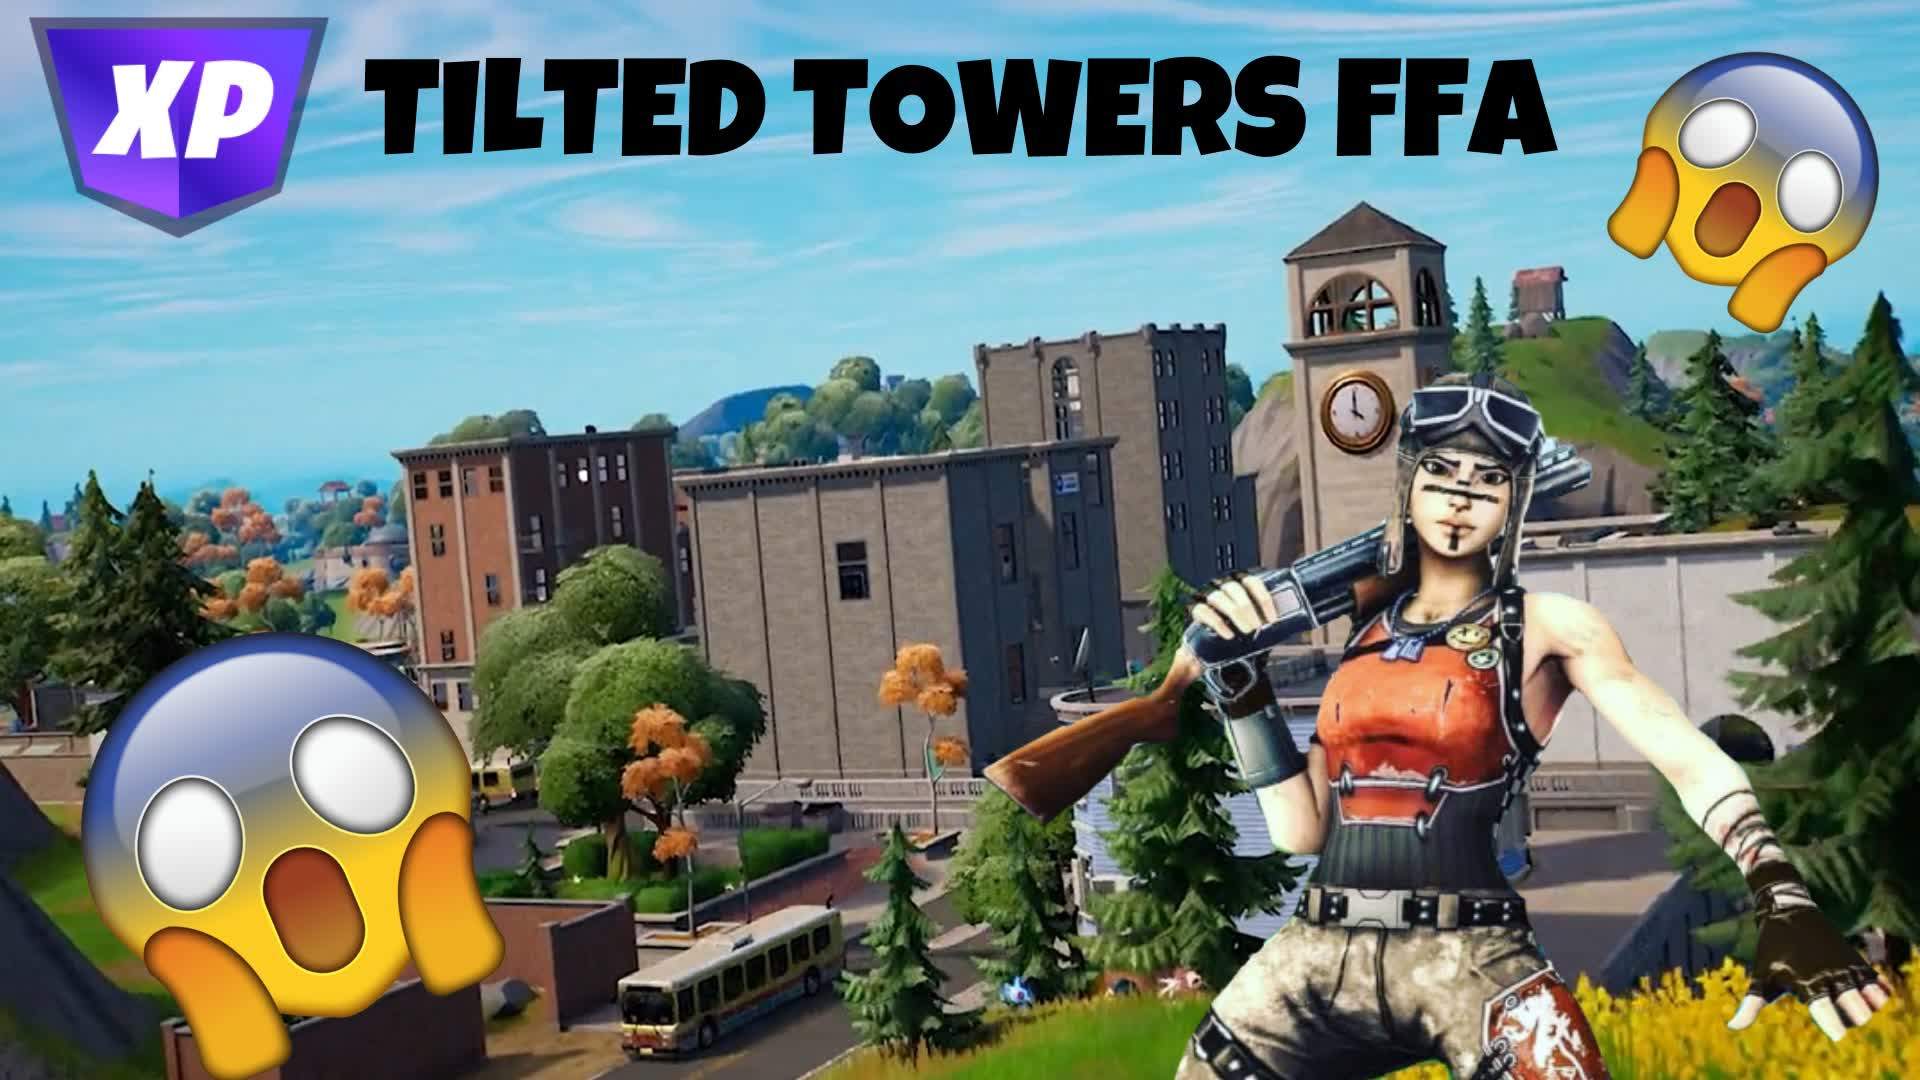 TILTED TOWERS FFA!